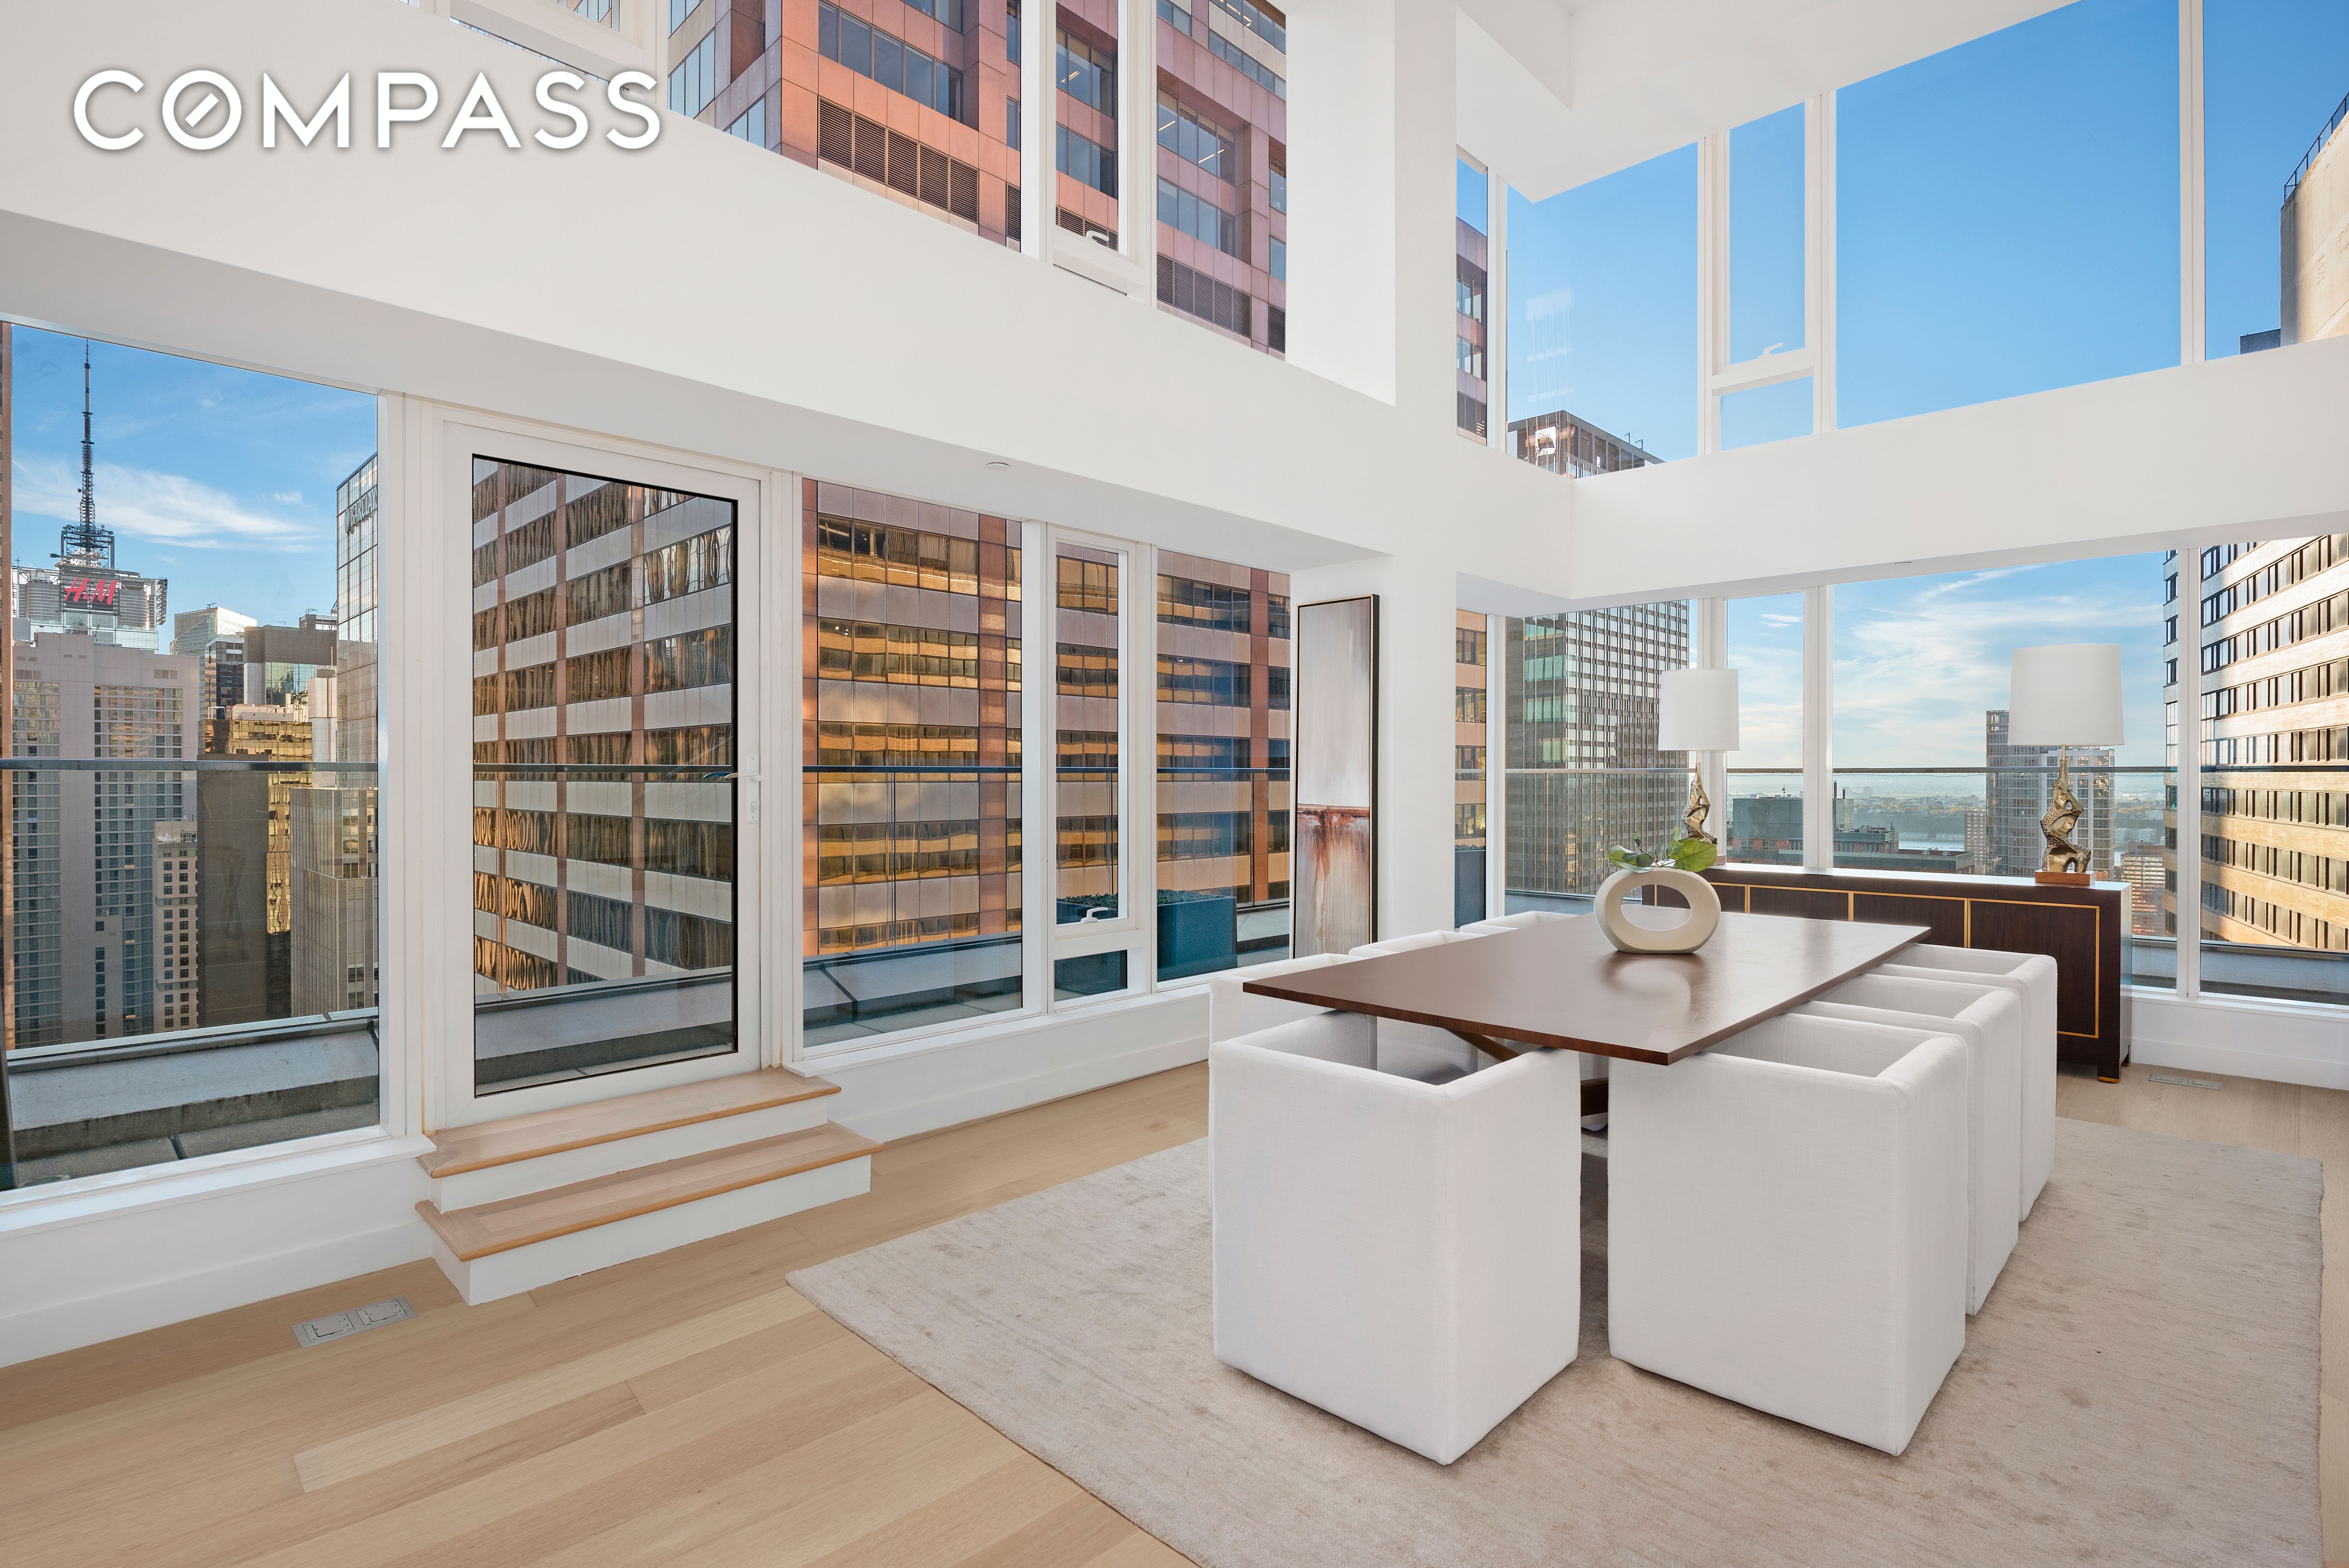 135 West 52nd Street Ph5, Theater District, Midtown West, NYC - 5 Bedrooms  
4.5 Bathrooms  
9 Rooms - 